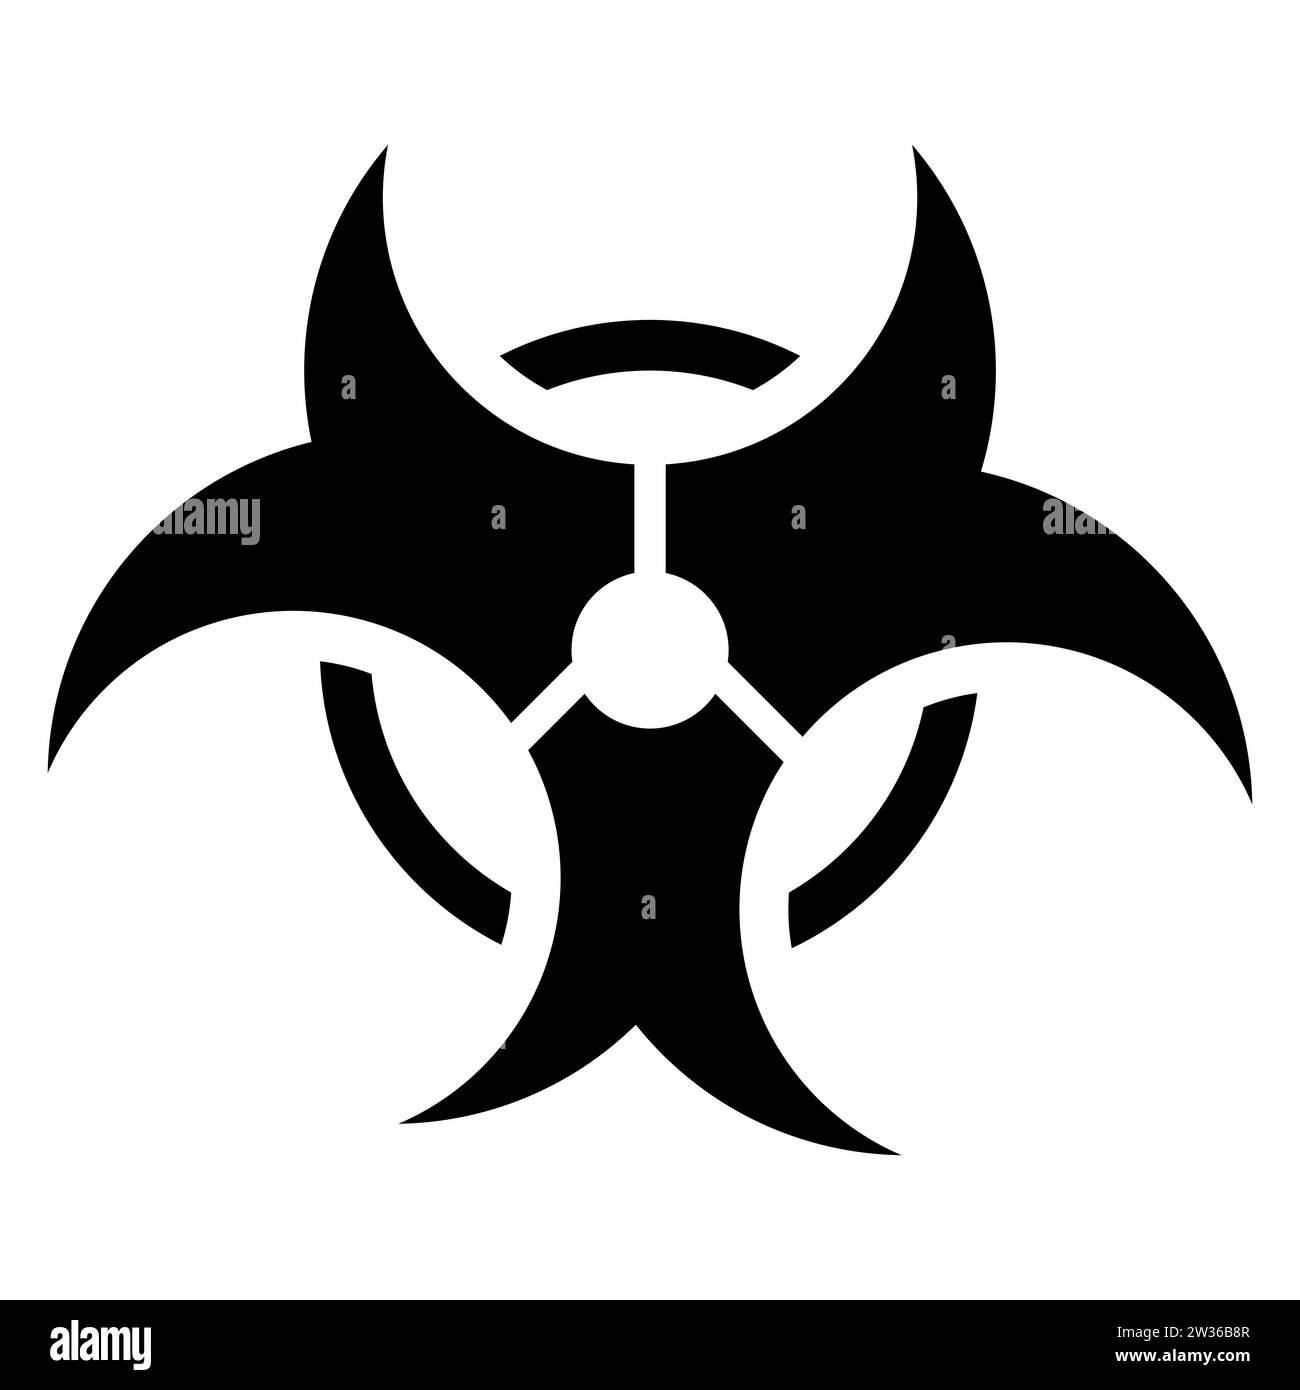 Black and white chemical hazard sign illustration. Irradiation, danger, radiation, disease, infection, nuclear power plant, mutation, x-ray Vector ico Stock Vector